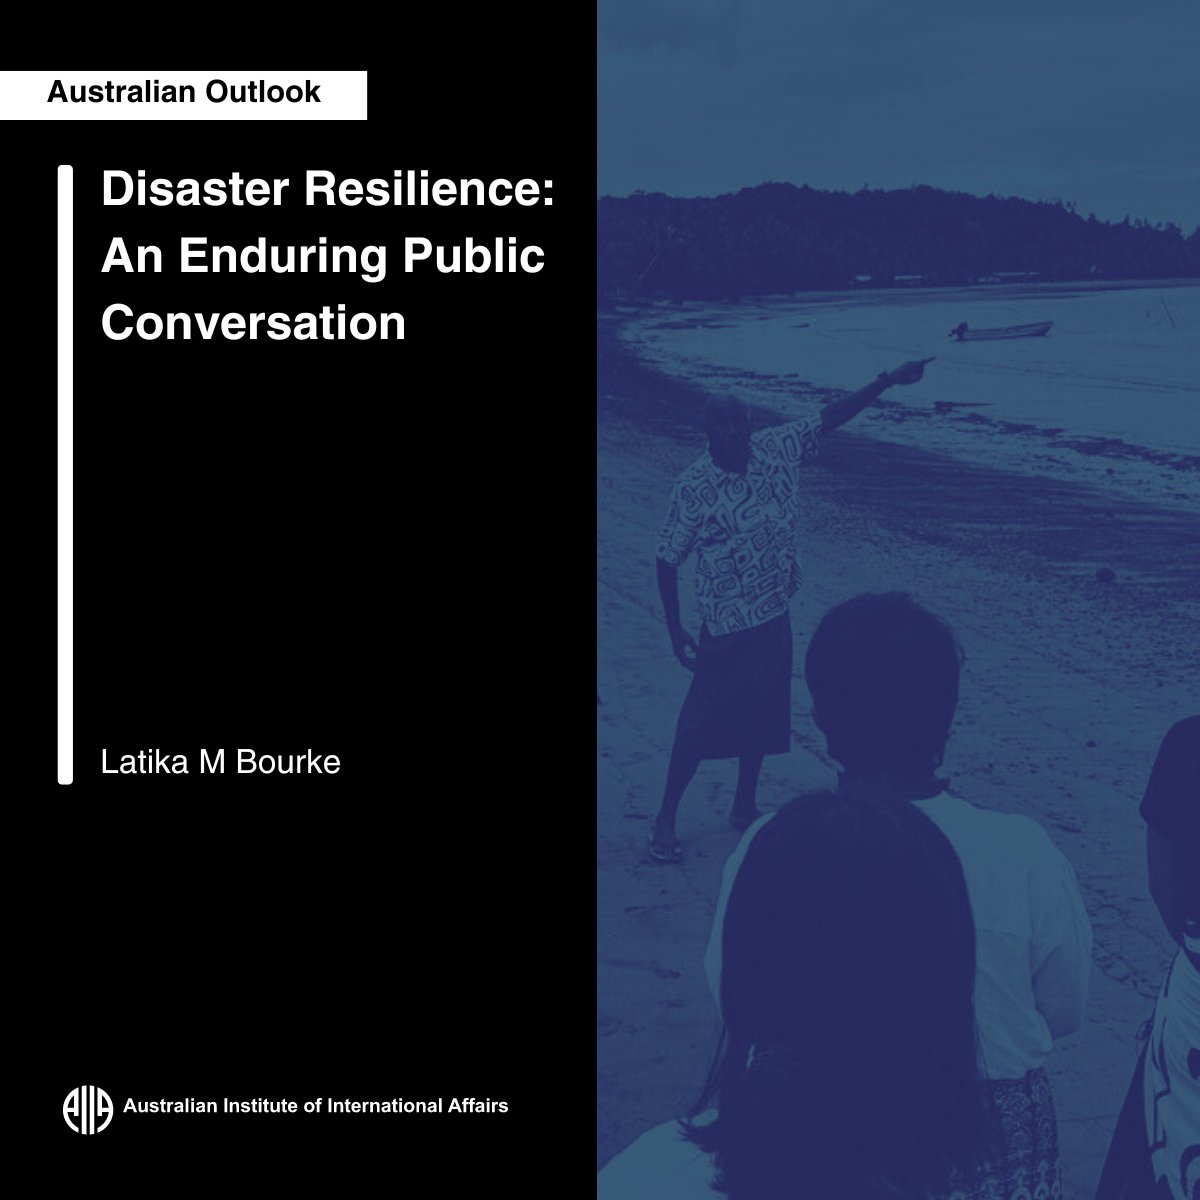 “The media and the public’s role in disaster resilience must be transformed,” discussed by Latika M Bourke Read more at Australian Outlook👇 ow.ly/BVty50RhMsX